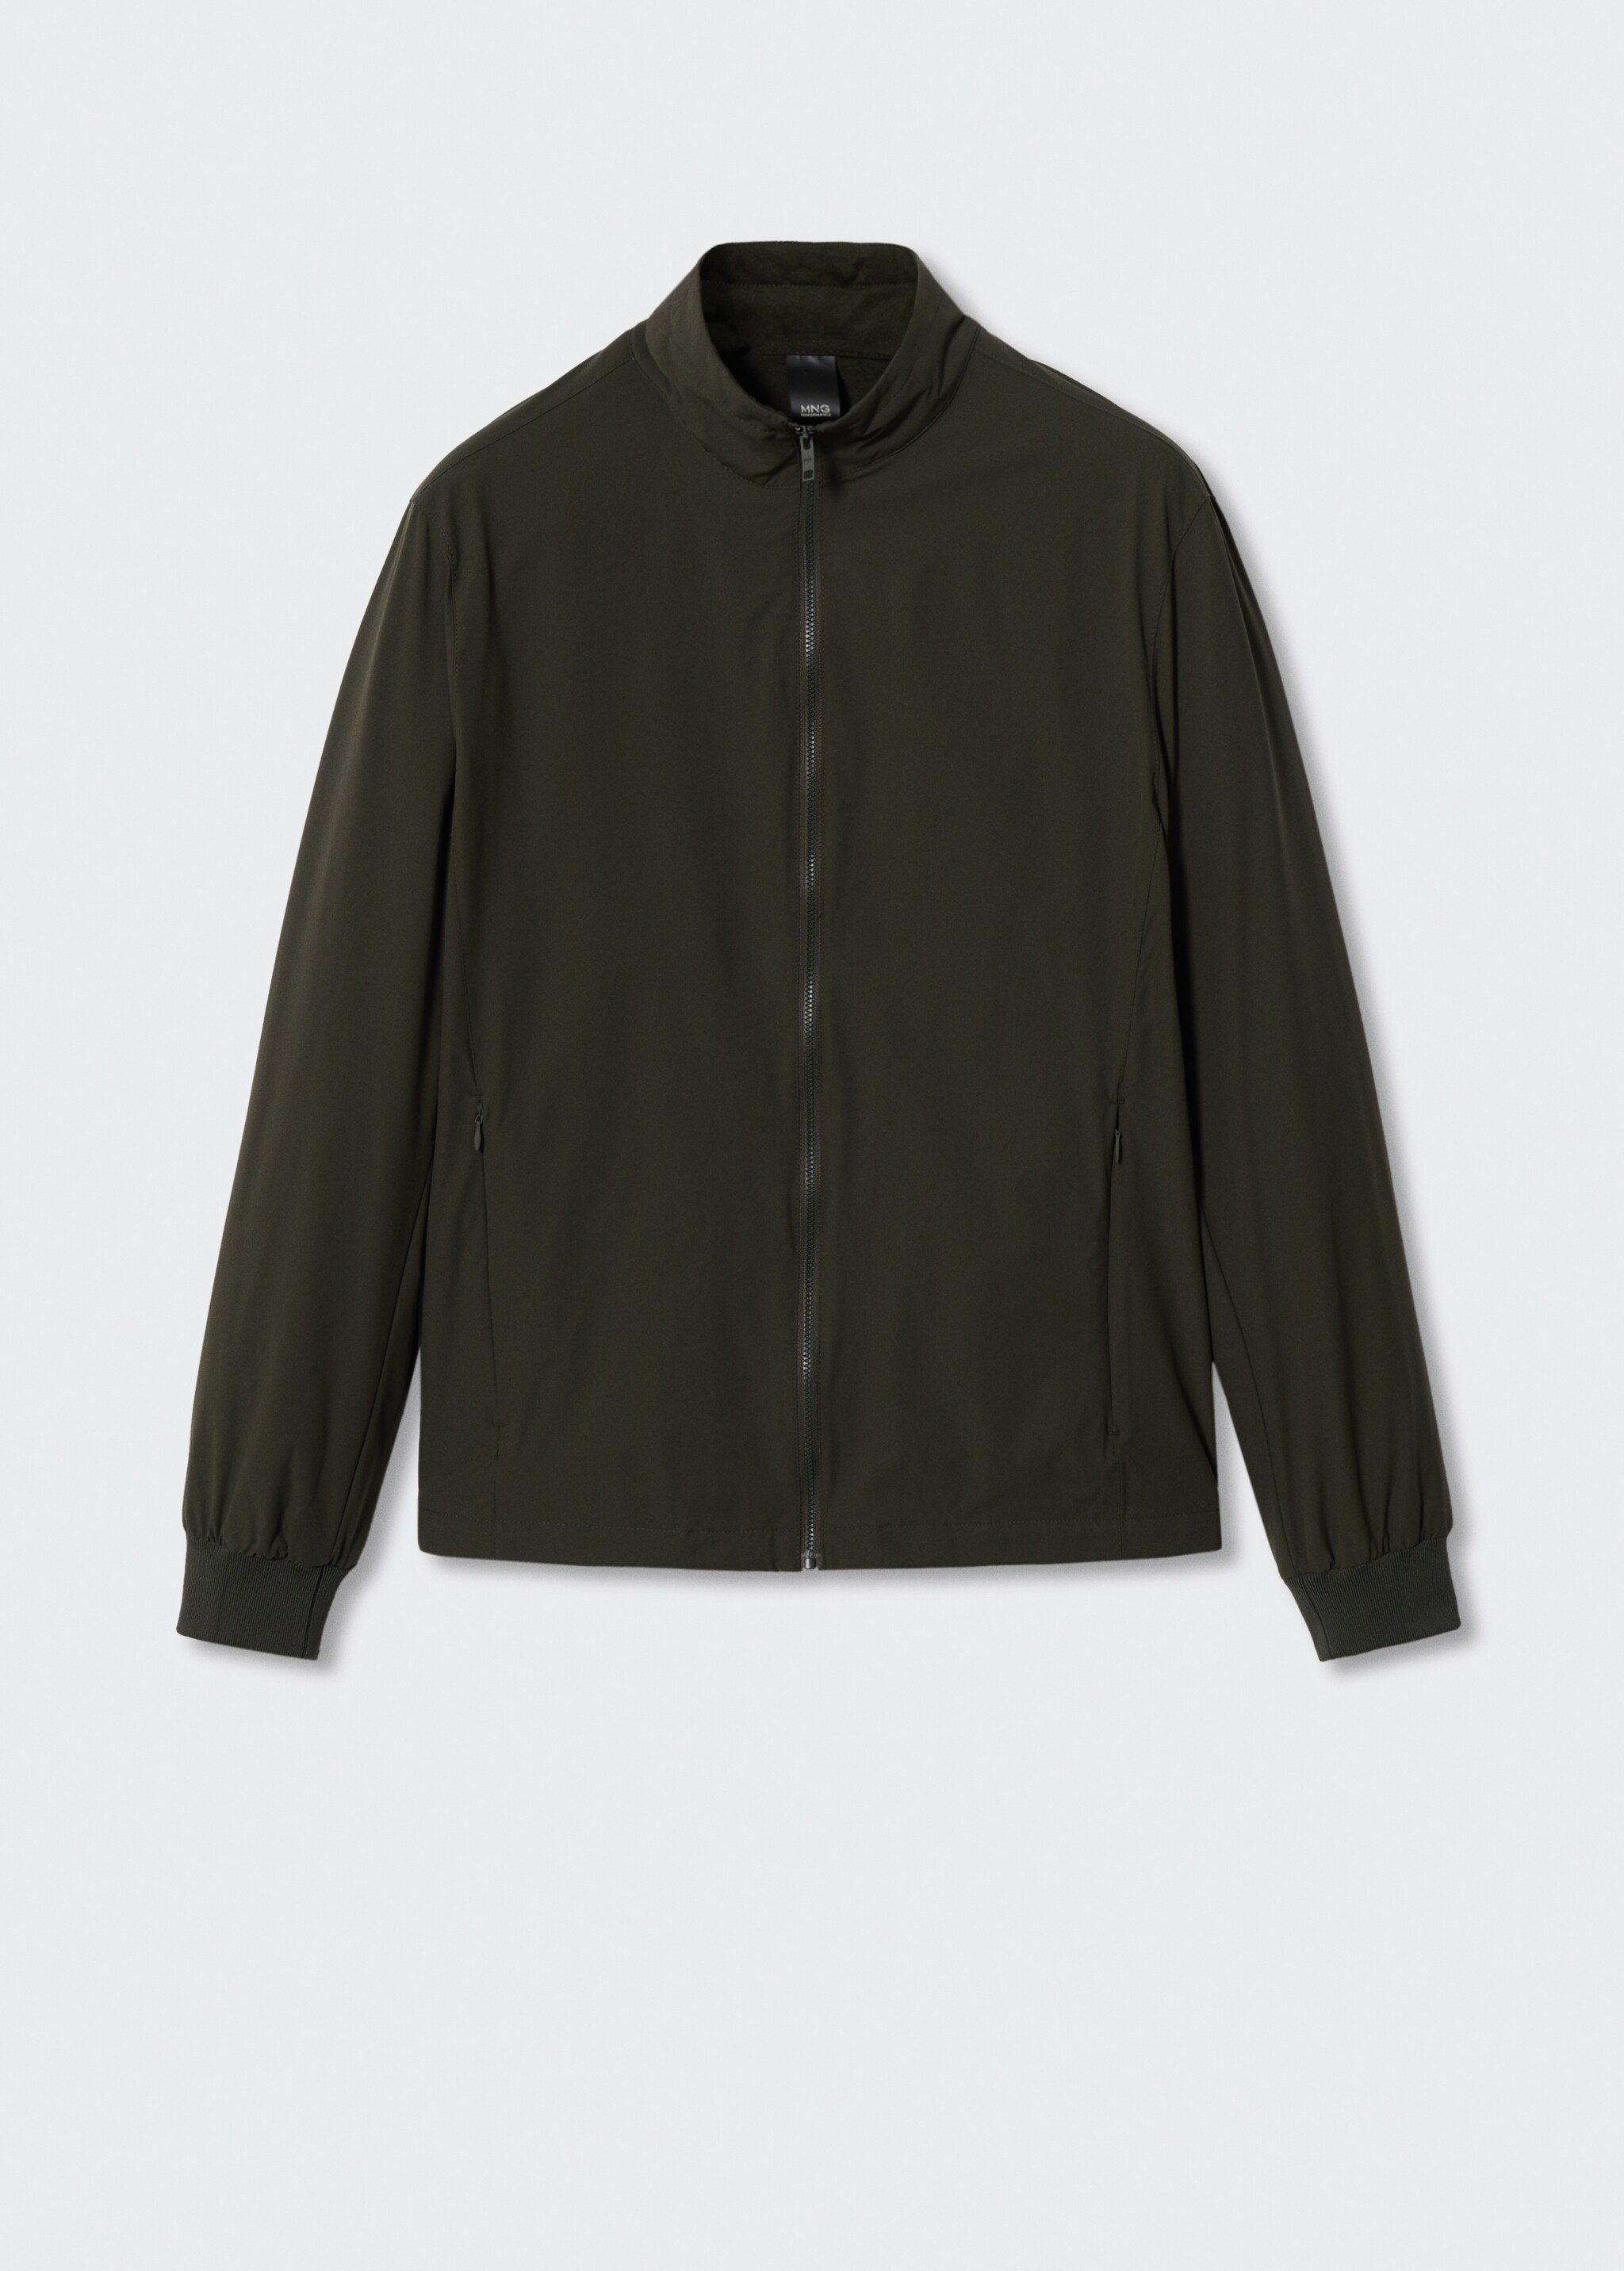 Waterproof bomber jacket - Article without model